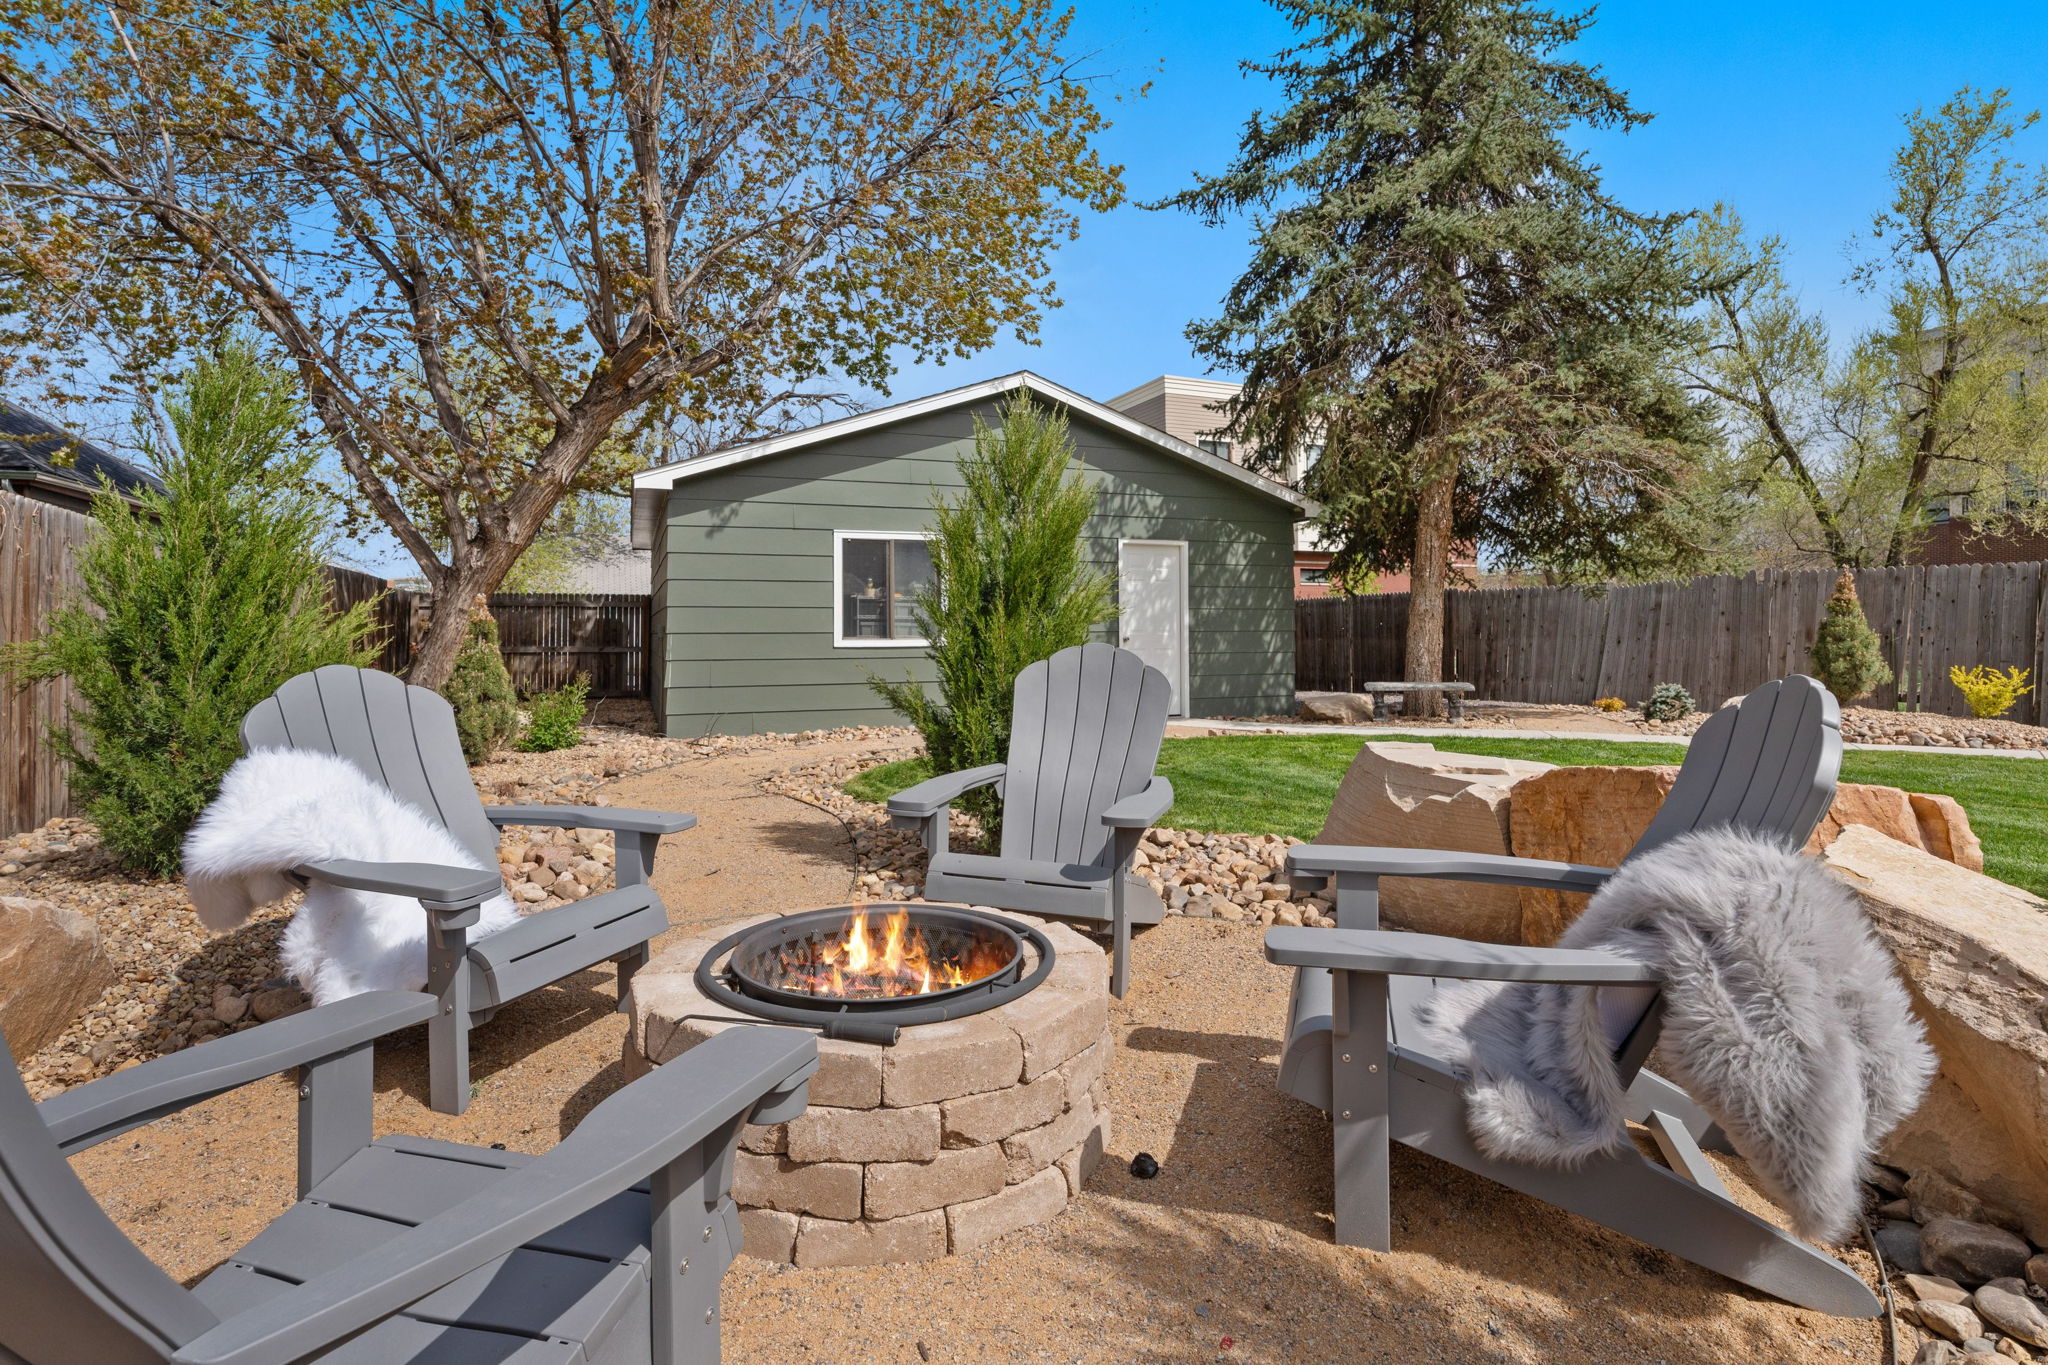 Private Backyard | Fire Pit, BBQ Grill and Private Hot Tub